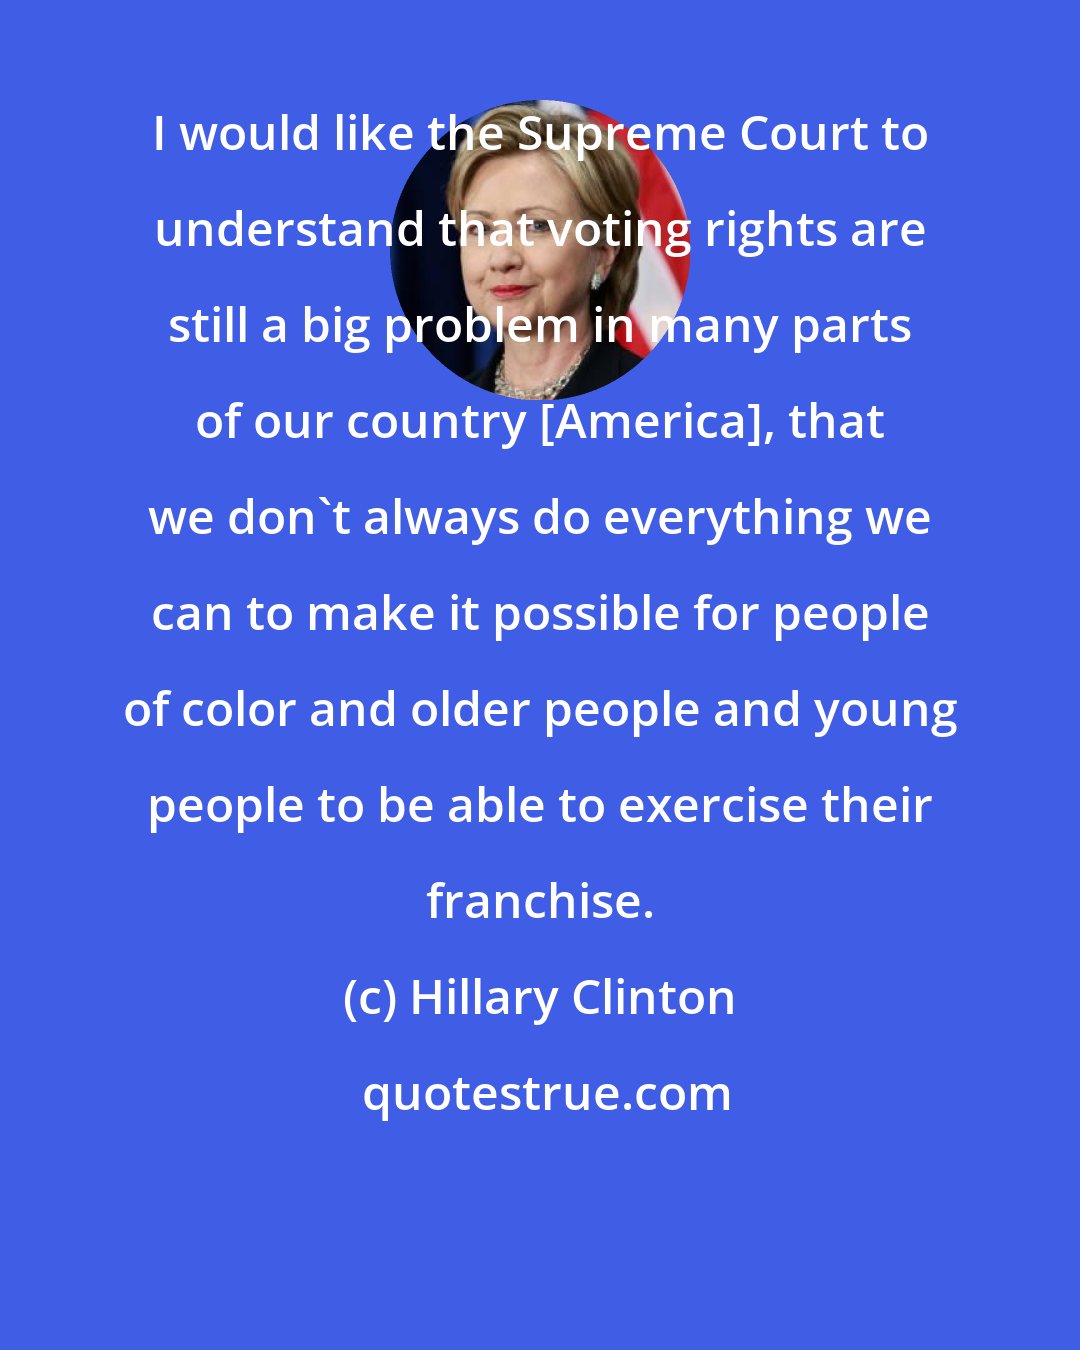 Hillary Clinton: I would like the Supreme Court to understand that voting rights are still a big problem in many parts of our country [America], that we don't always do everything we can to make it possible for people of color and older people and young people to be able to exercise their franchise.